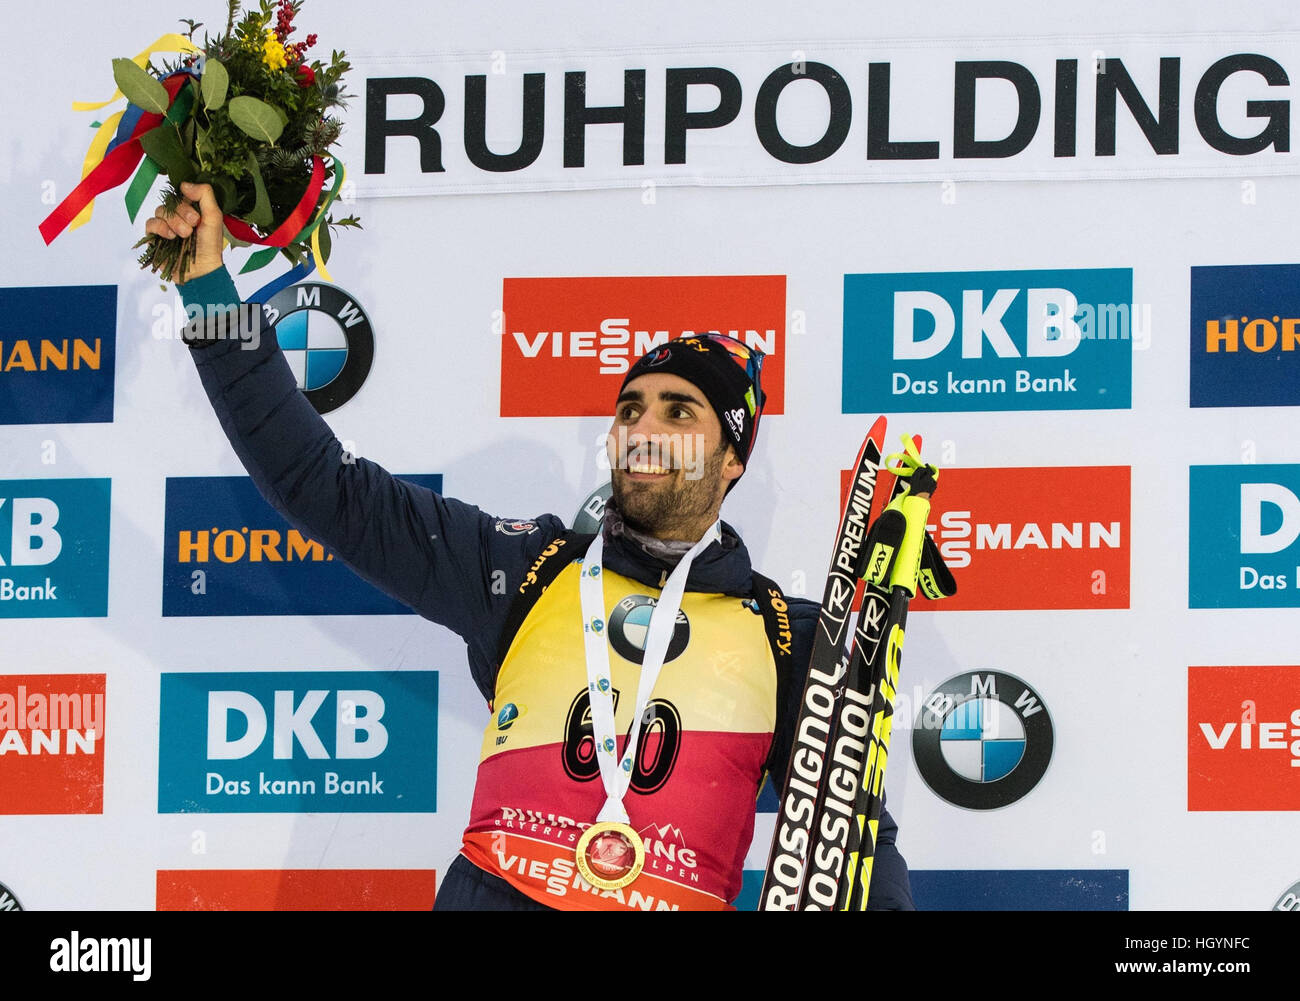 Ruhpolding, Germany. 13th Jan, 2017. French biathlete Martin Fourcade on the victors' podium after competing in the men's 10 kilometer sprint at the Biathlon World Cup in the Chiemgau Arena in Ruhpolding, Germany, 13 January 2017. Fourcade finished in 1st place, Eberhard in 2nd place and Svendsen in 3rd place. Photo: Matthias Balk/dpa/Alamy Live News Stock Photo